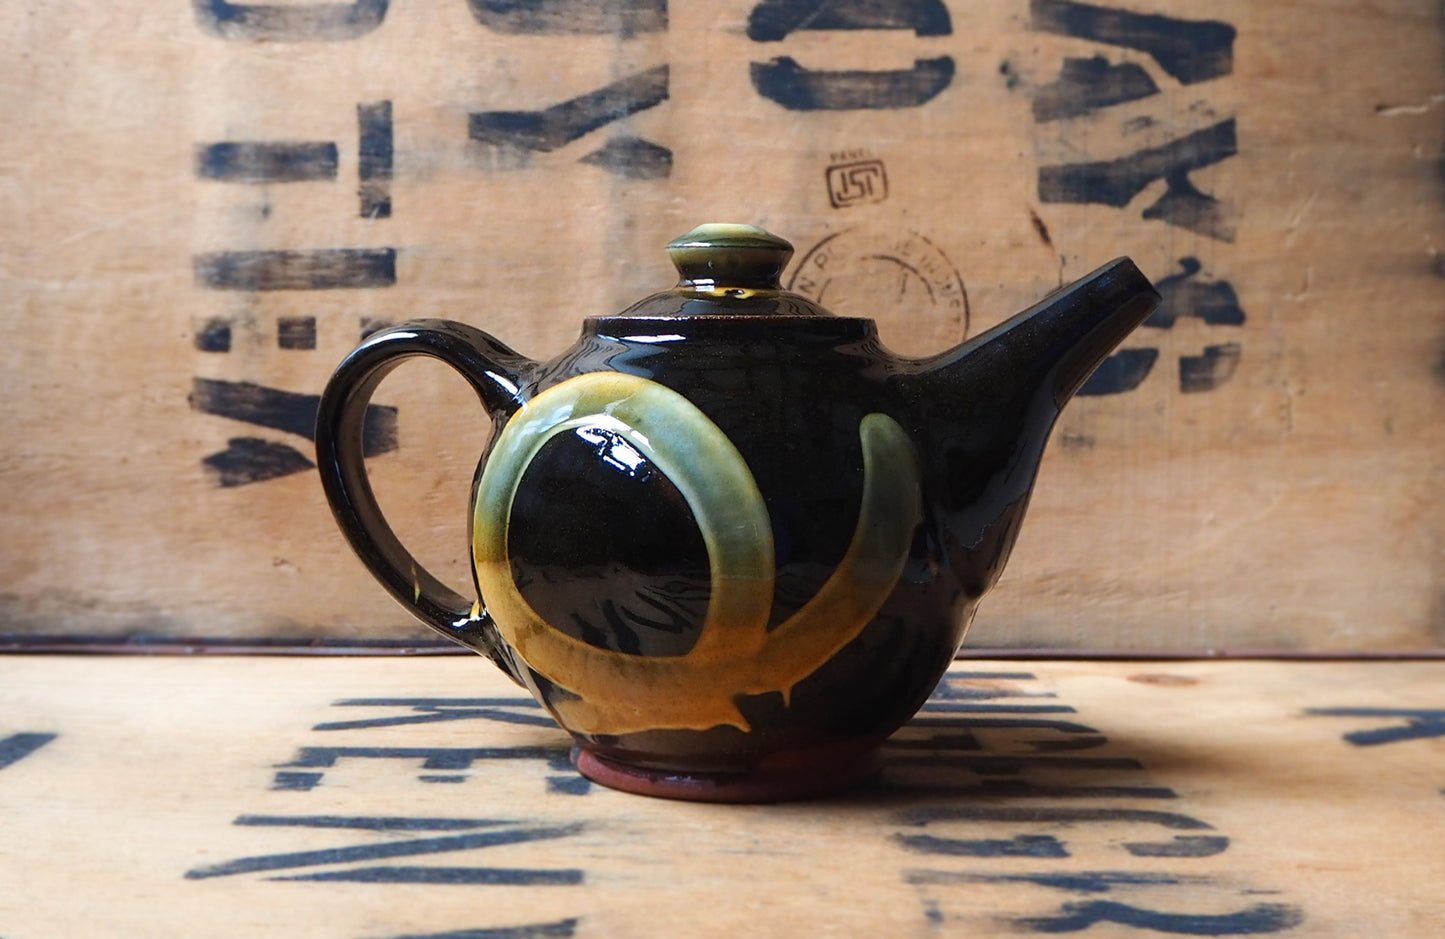 Teapot (1) by Mike Parry